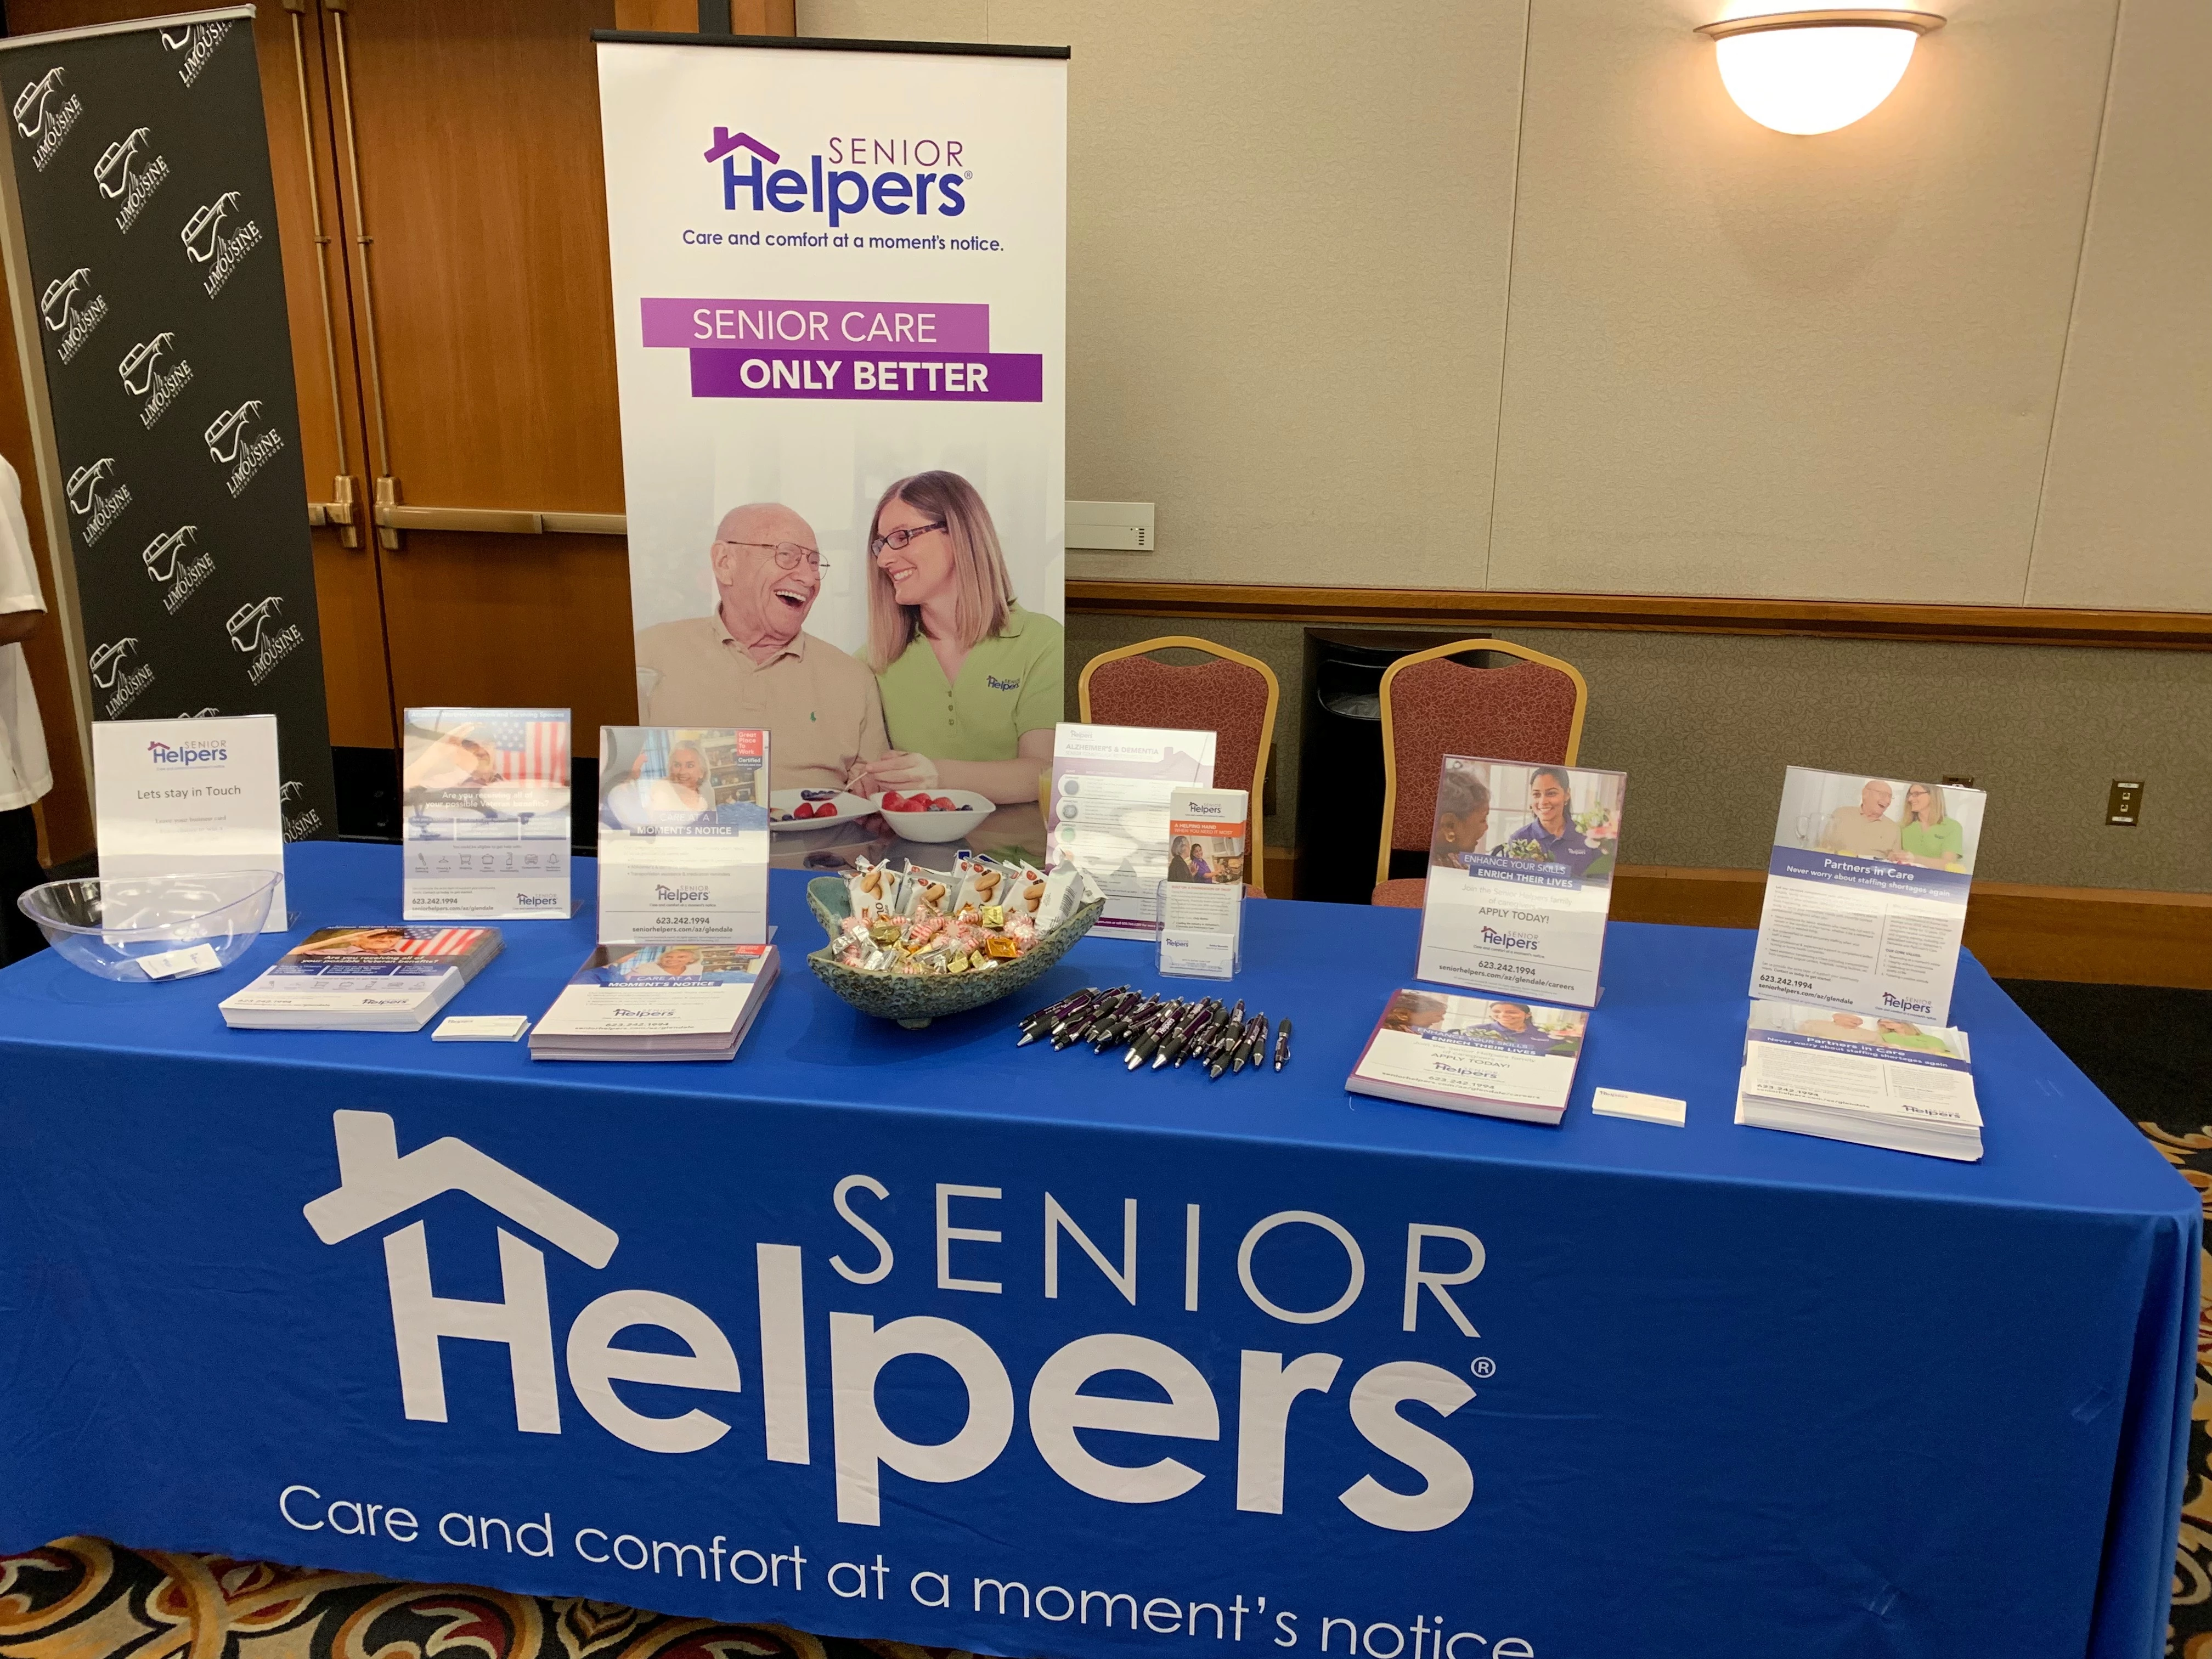 Senior Helpers at the Glendale Chamber Expo